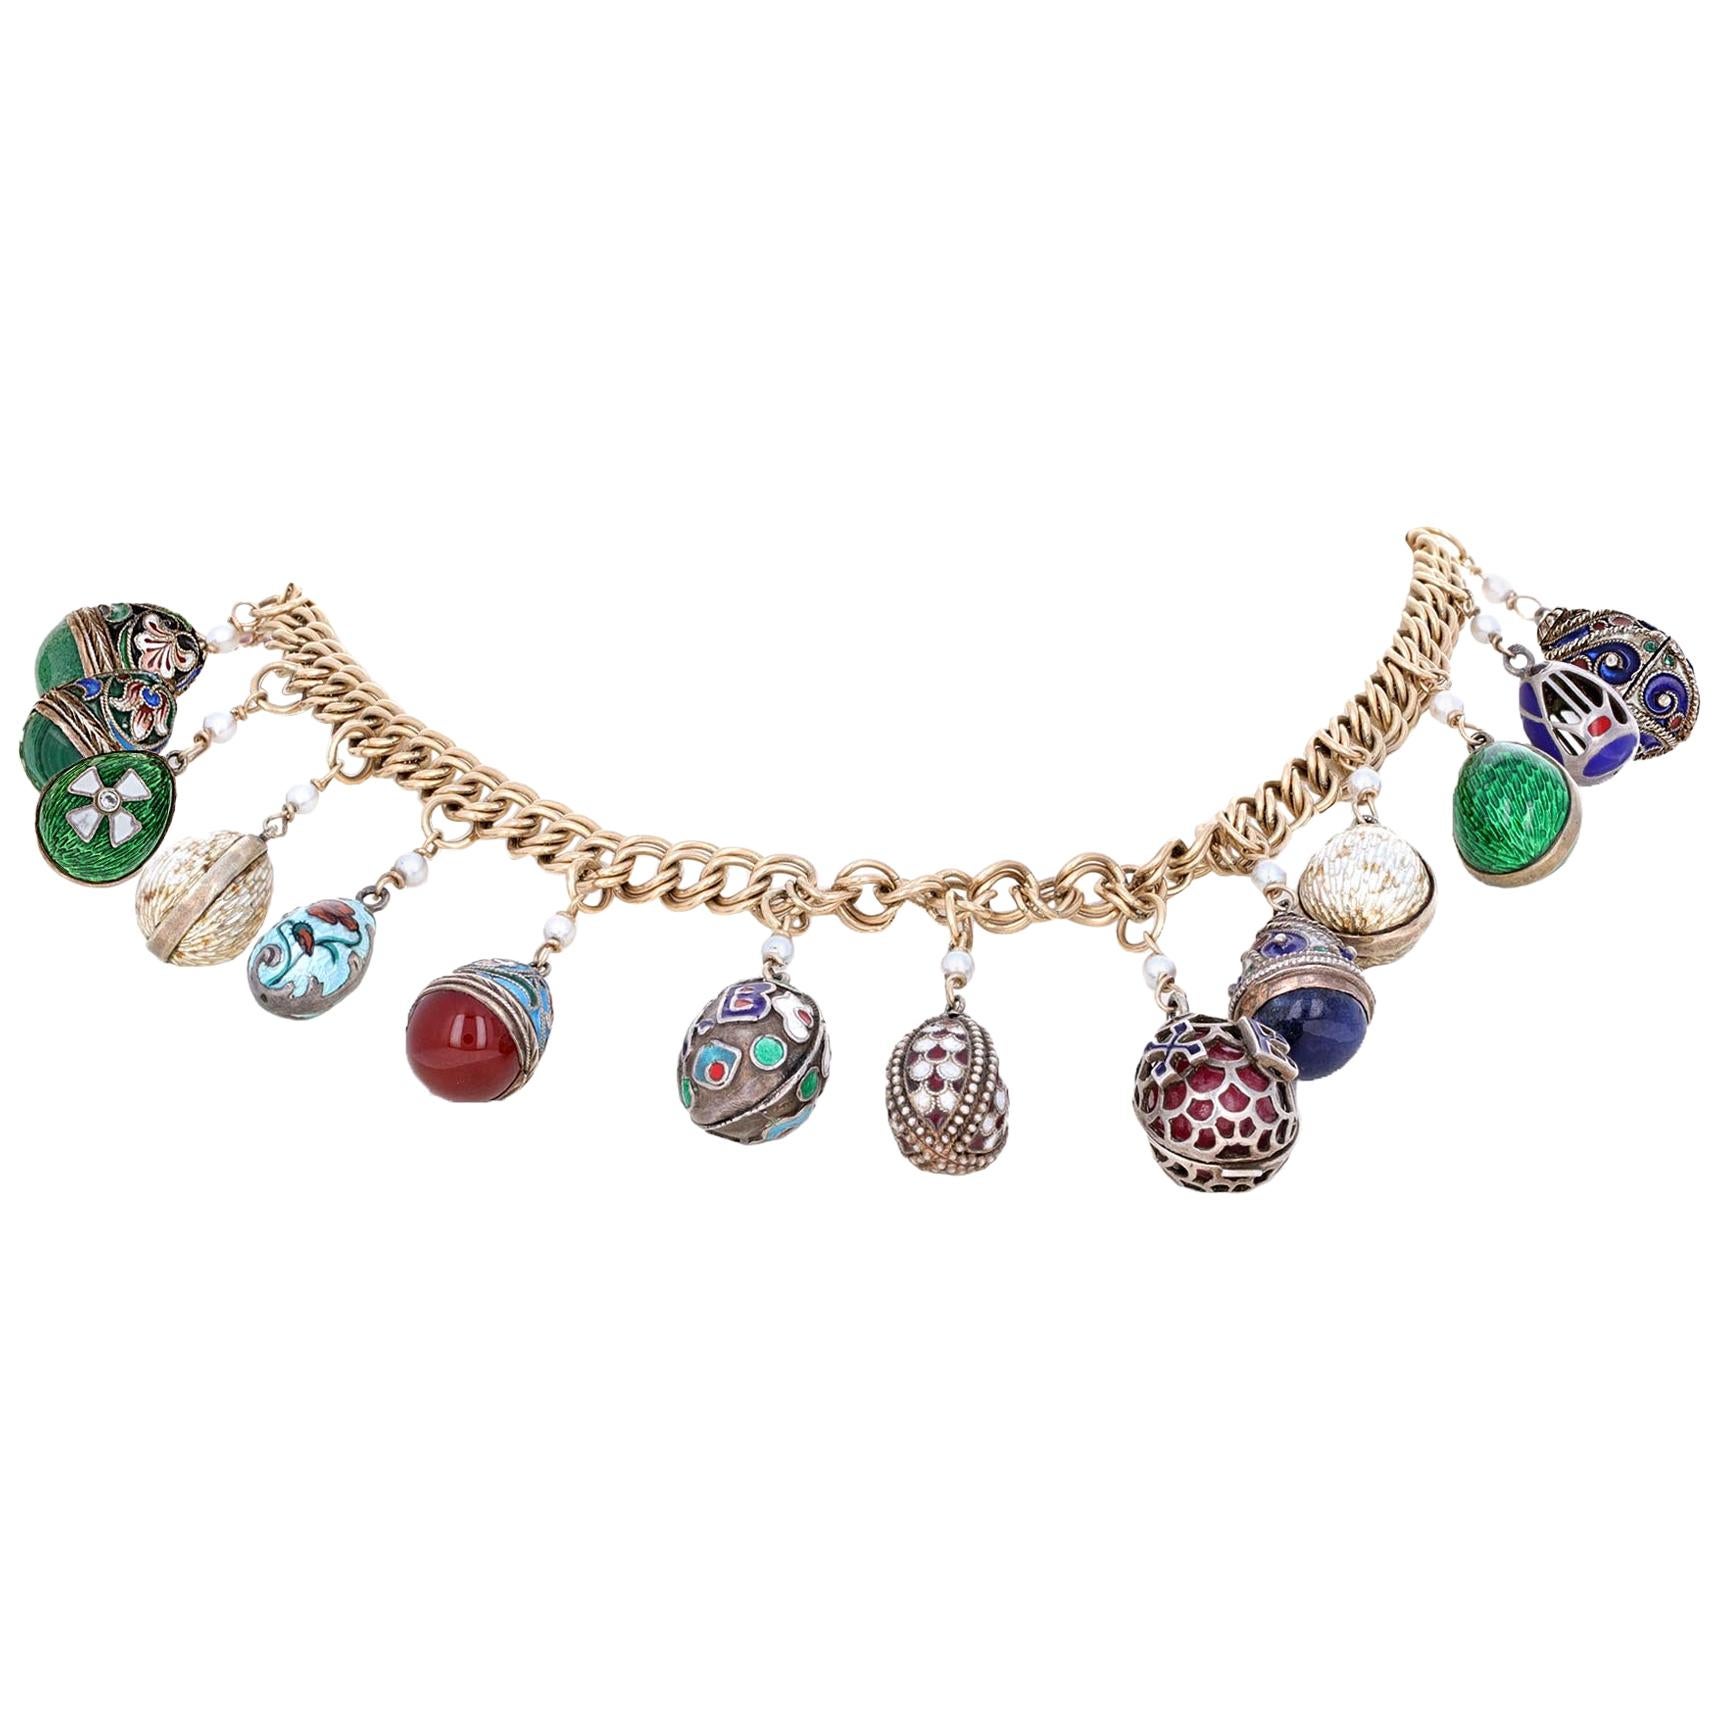 14 karat yellow gold enameled Faberge style charm necklace. This modern take on the classic Faberge features hanging eggs in blues, greens, reds and white enamel. The eggs are hanging from an 14 karat yellow gold chain. The eggs are hand made with